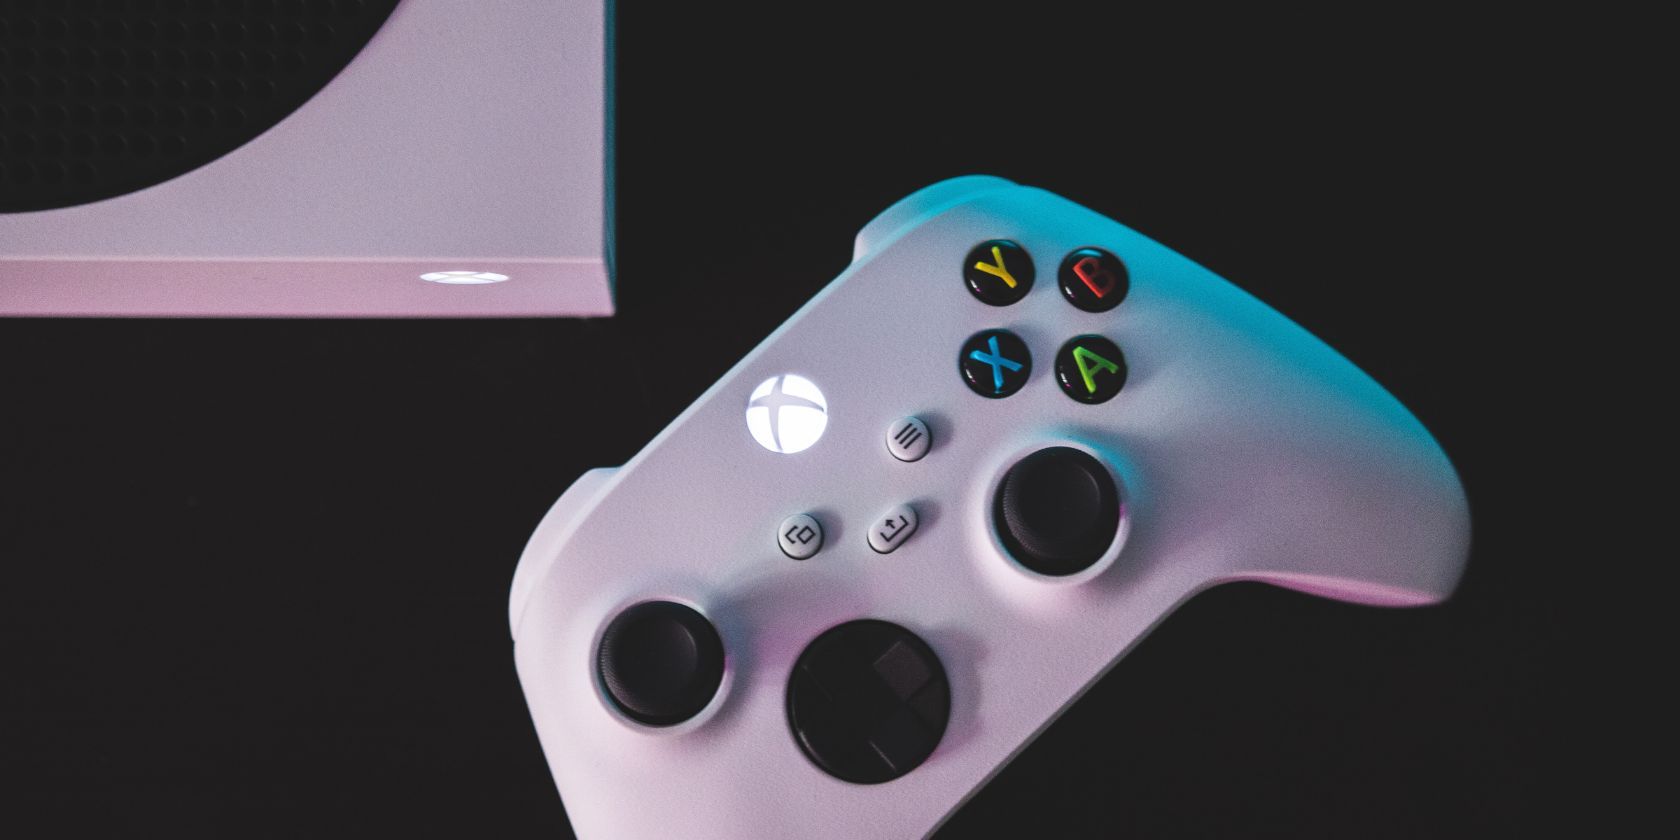 Xbox controller and console on a black surface